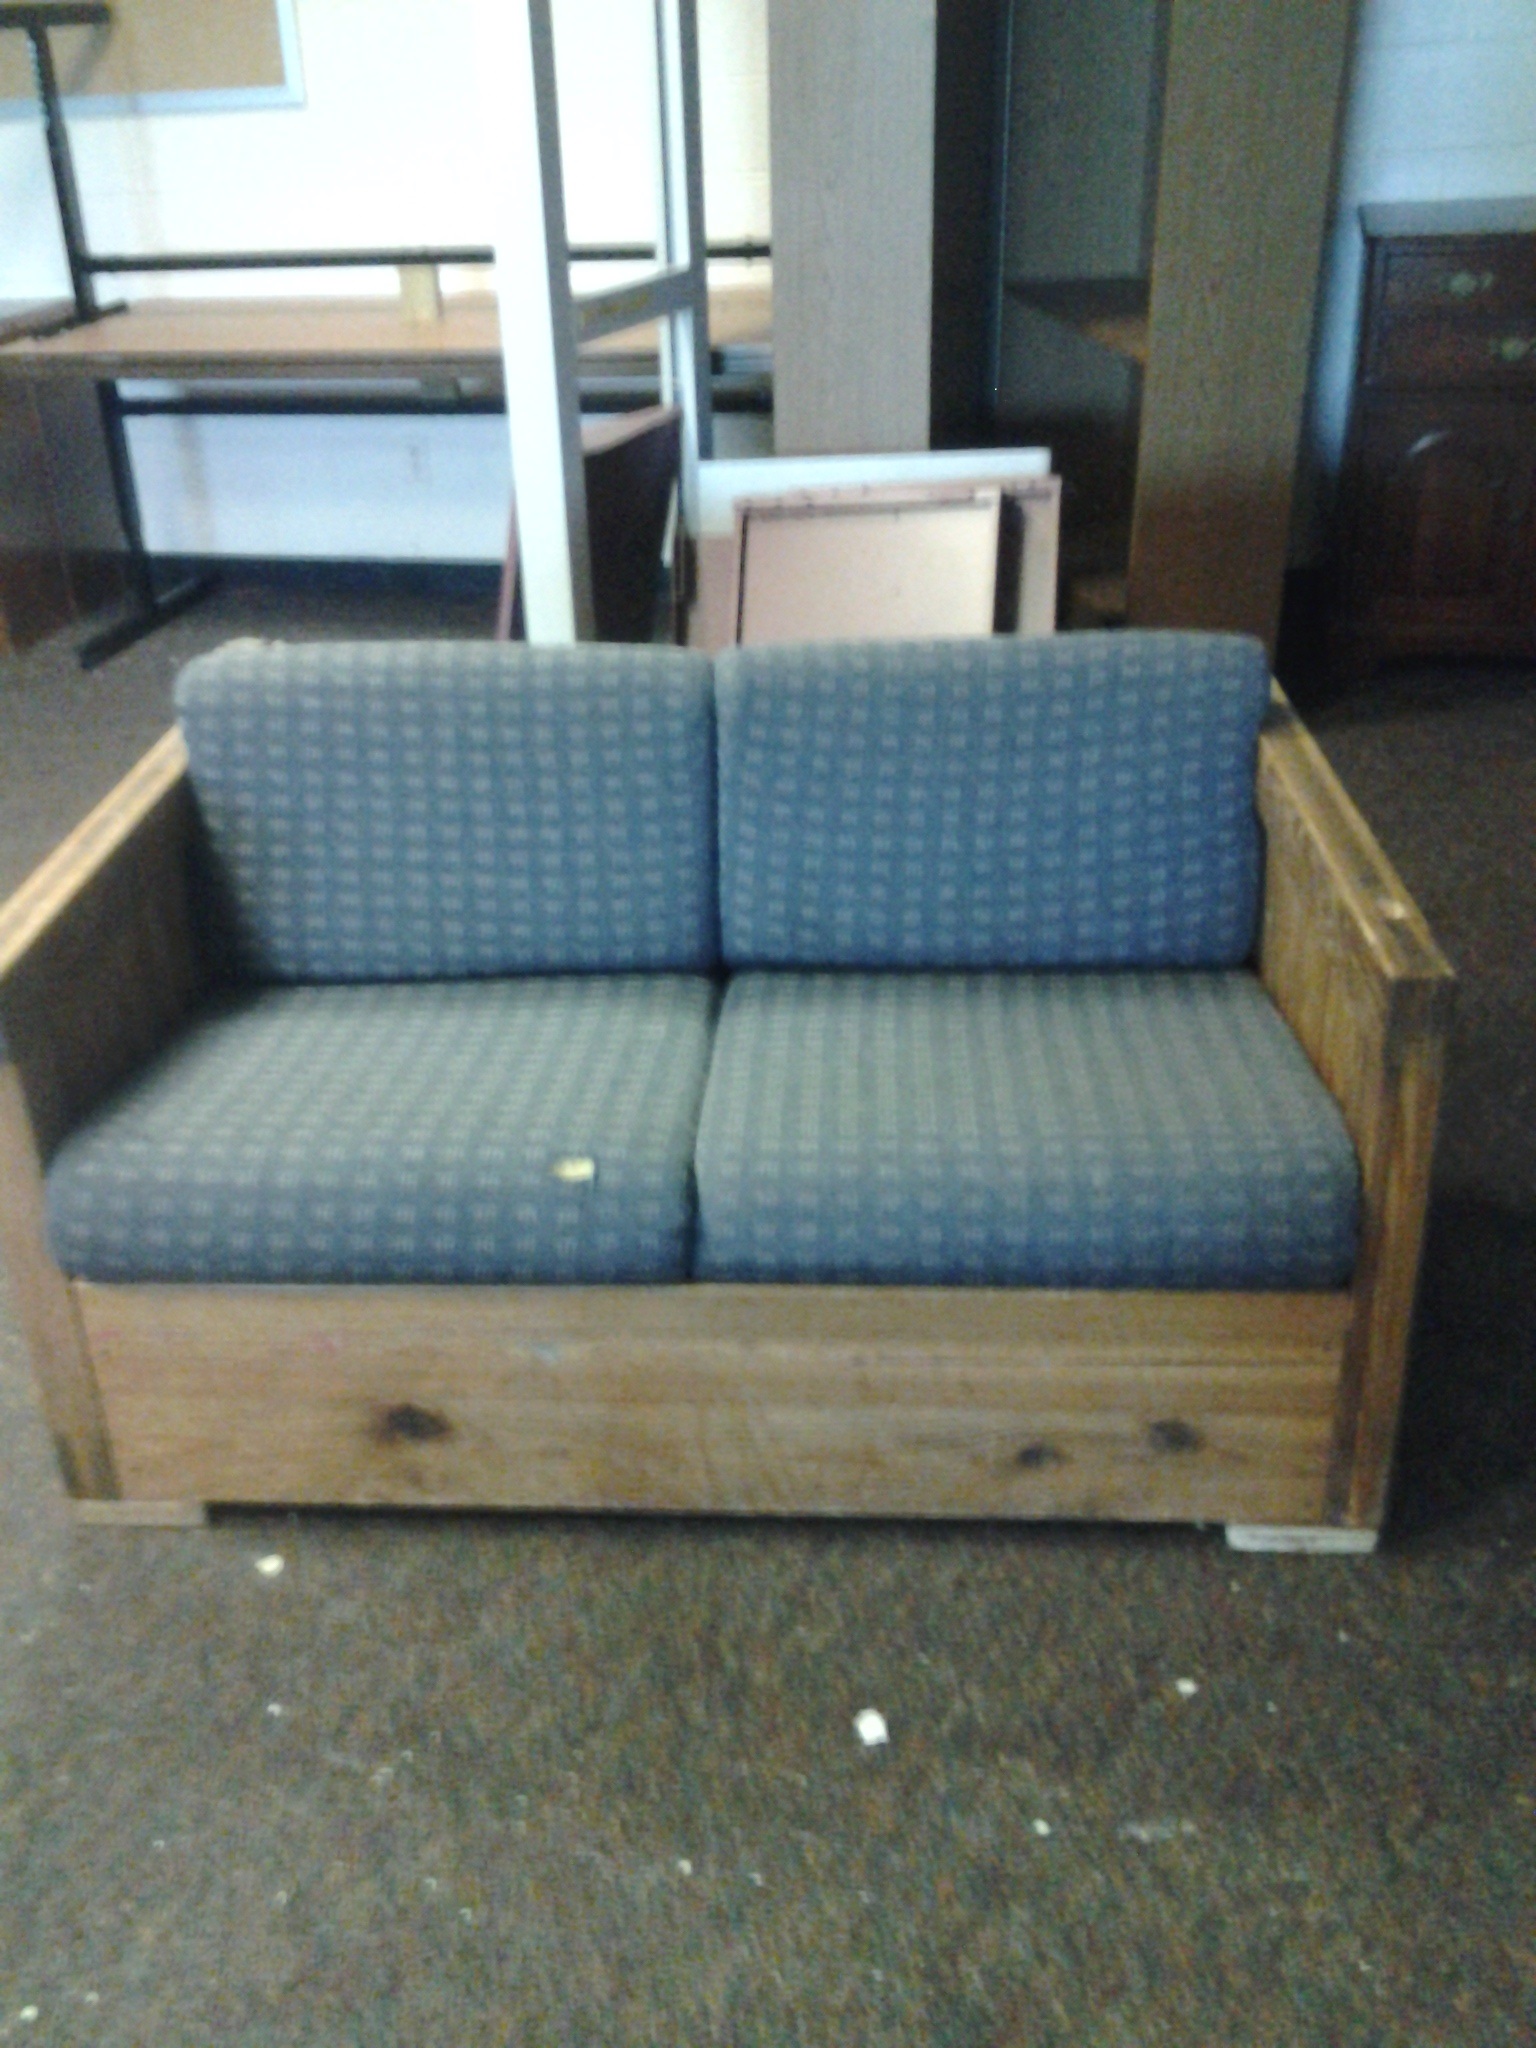 2 Seat Teal Couch